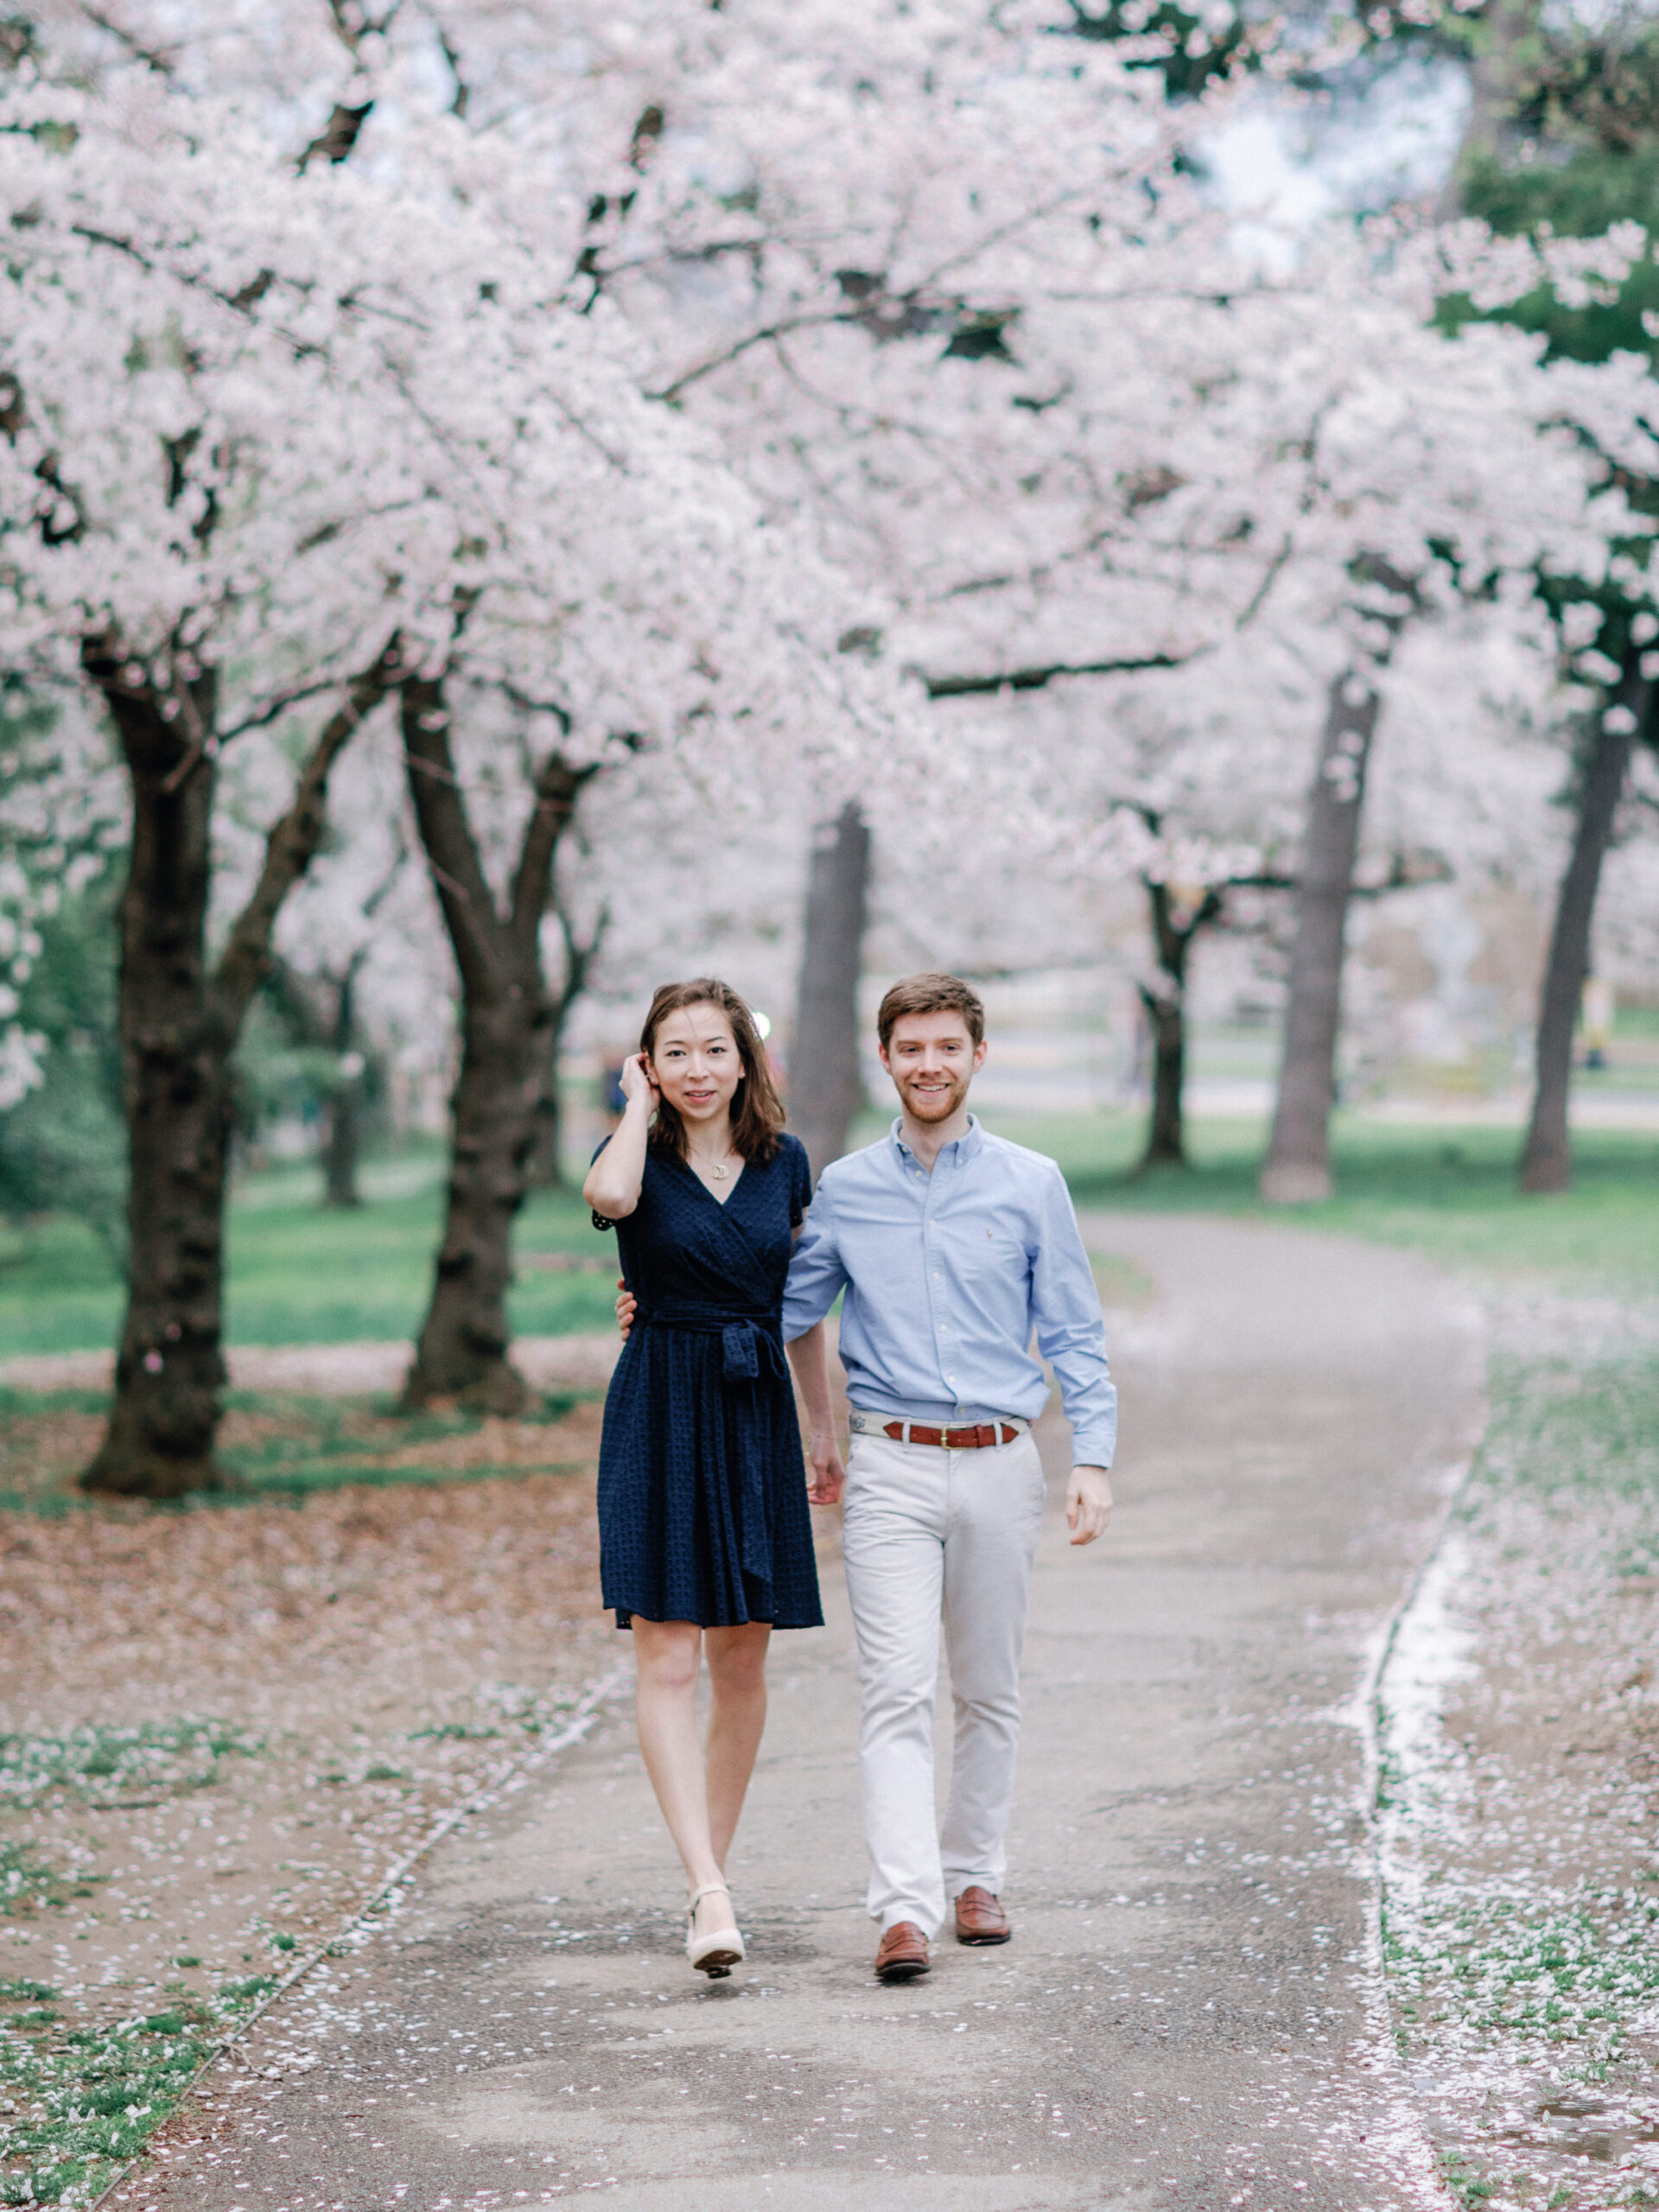 A newly engaged couple walking hand in hand underneath cherry blossom trees in full bloom.